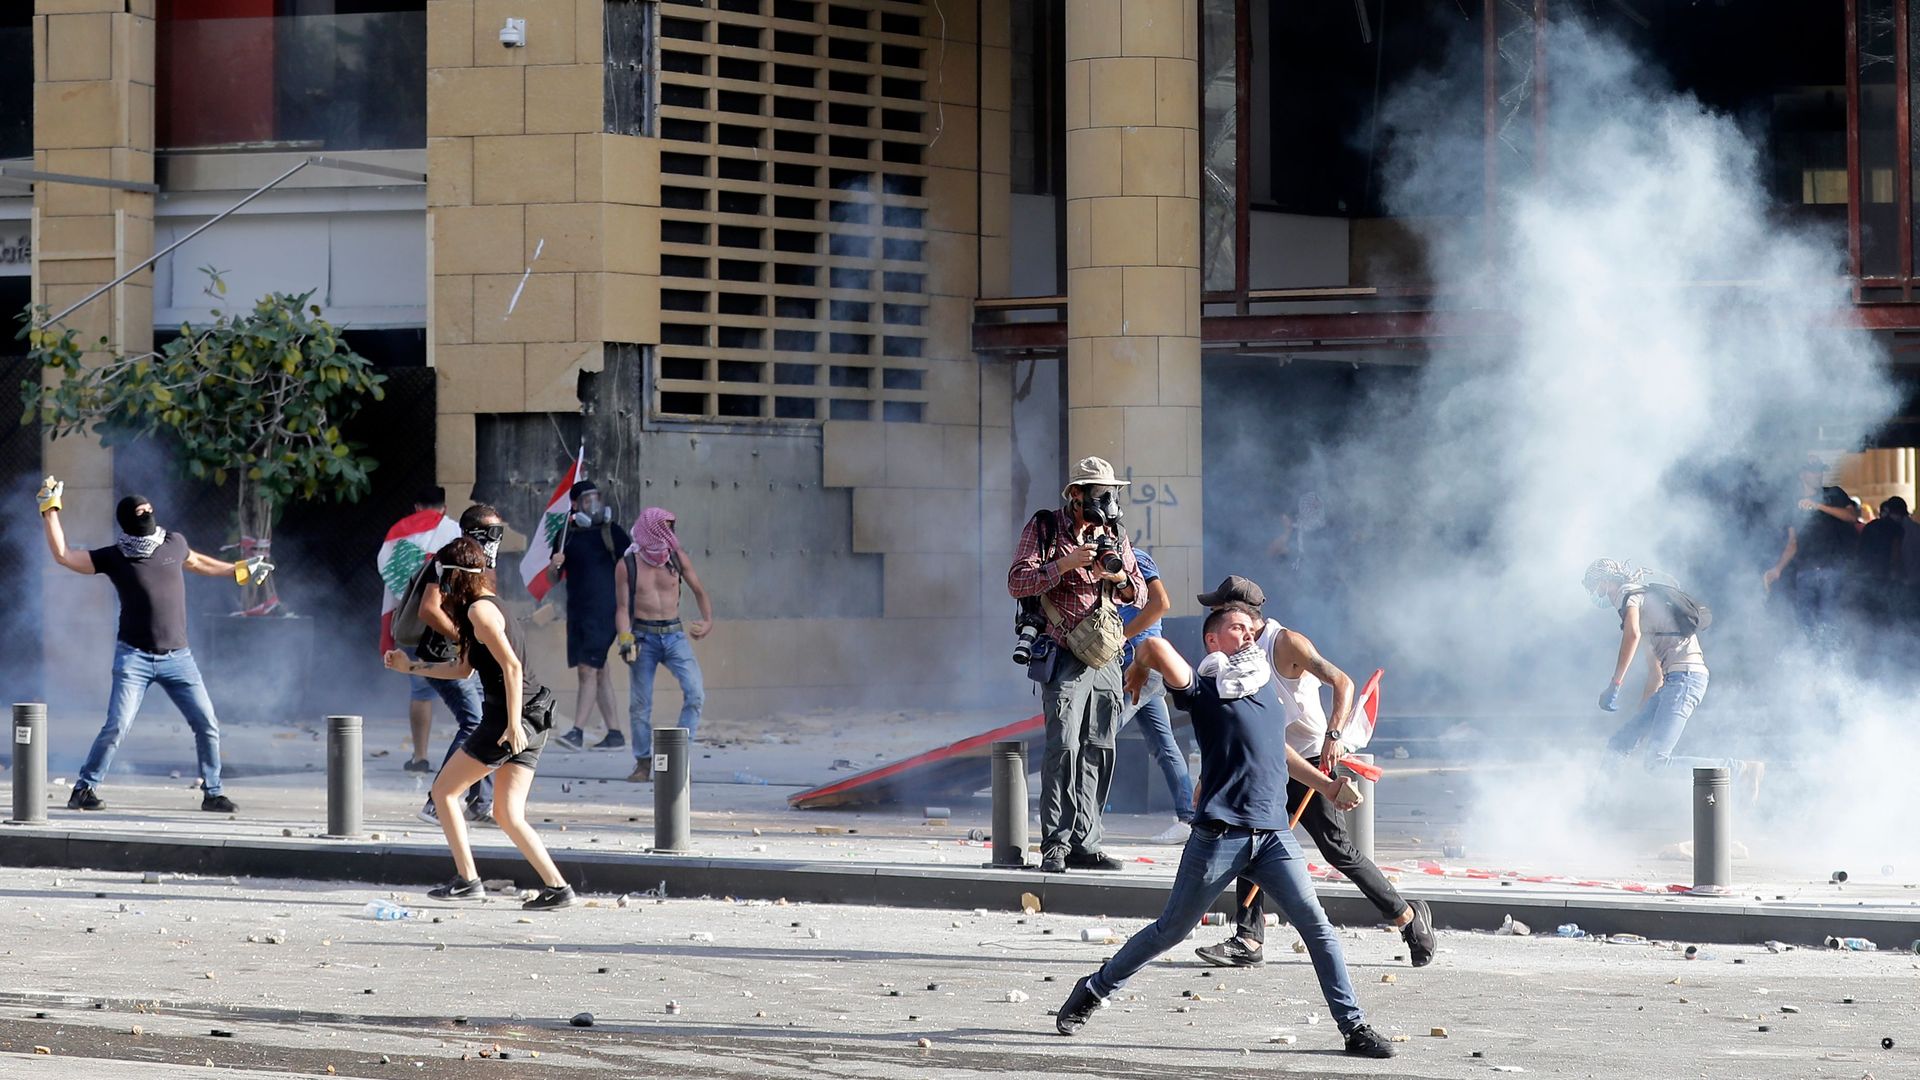 Protesters clashing with security forces in Beirut on Aug. 8.